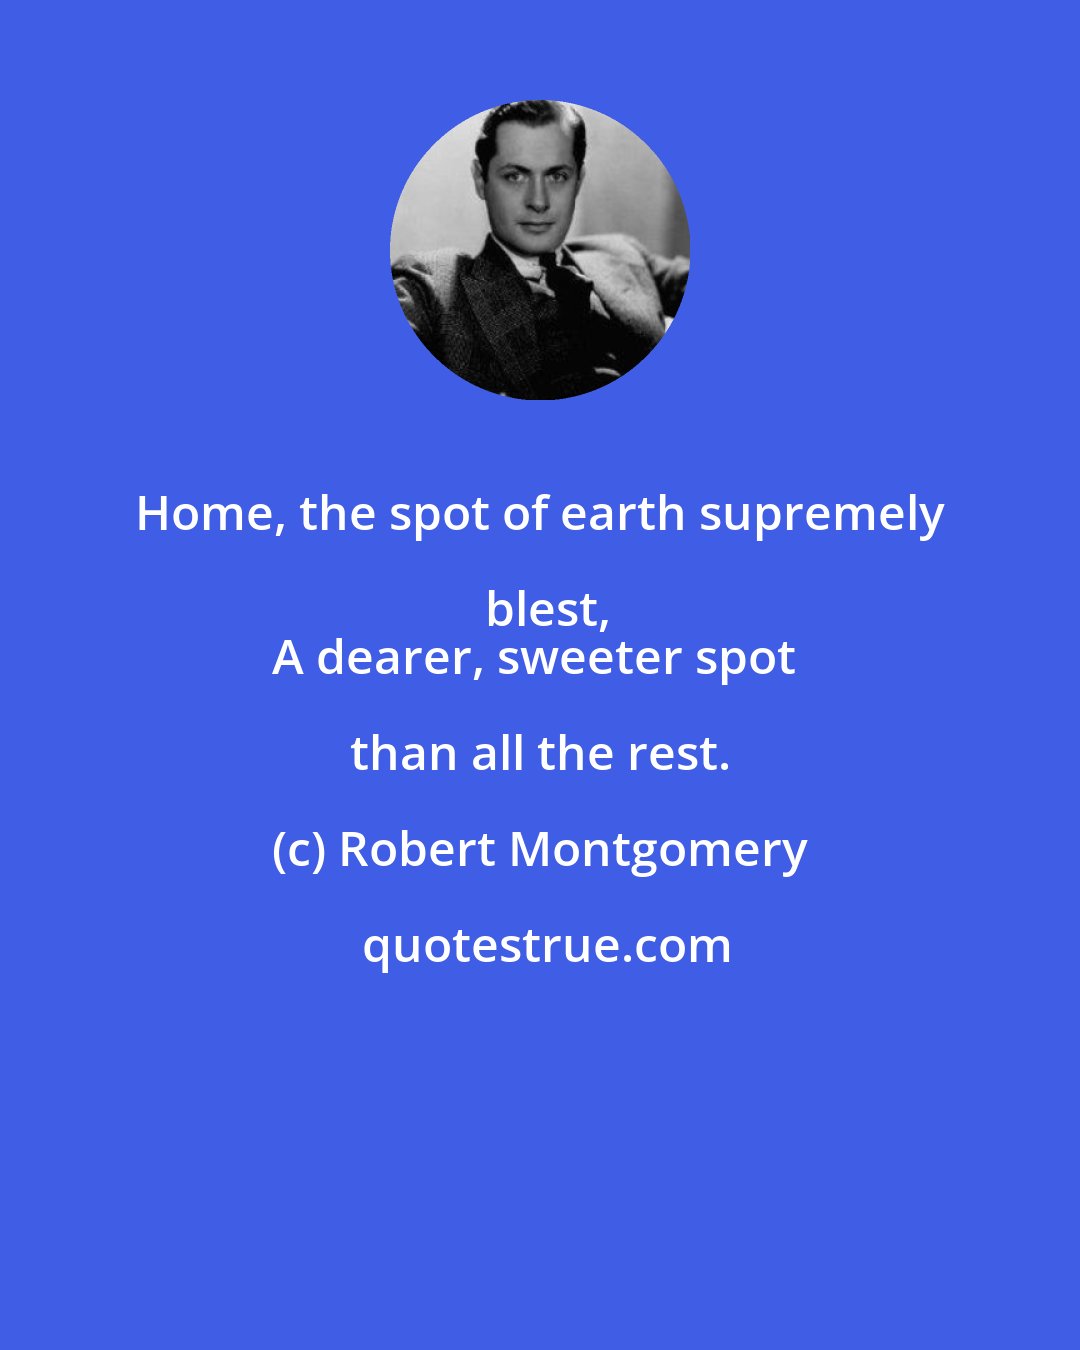 Robert Montgomery: Home, the spot of earth supremely blest,
A dearer, sweeter spot than all the rest.